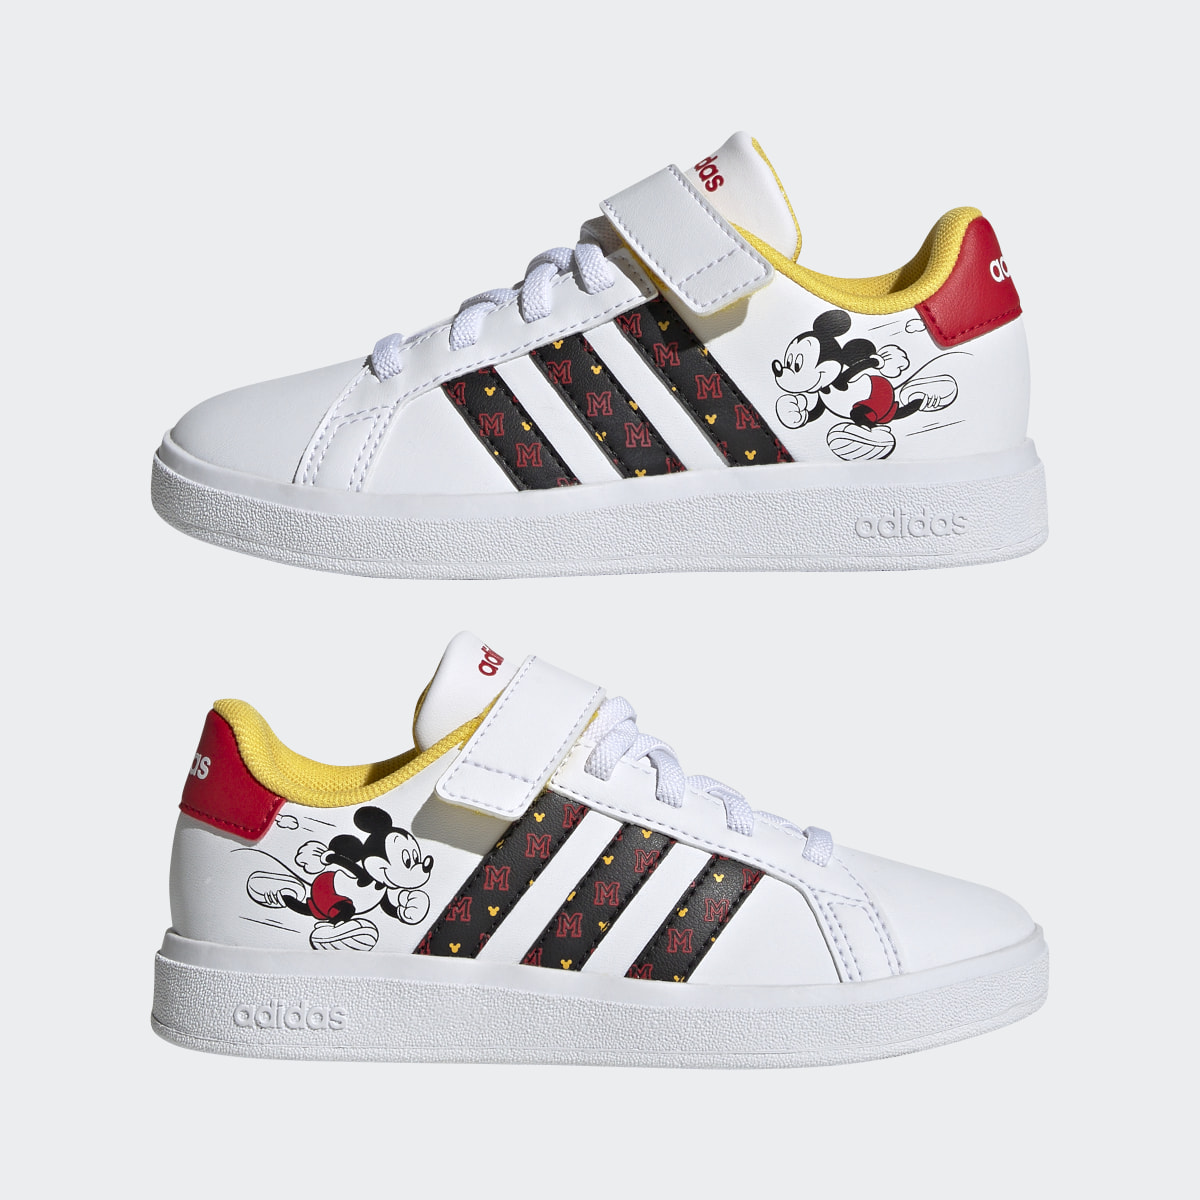 Adidas x Disney Grand Court Mickey Hook-and-Loop Shoes. 8